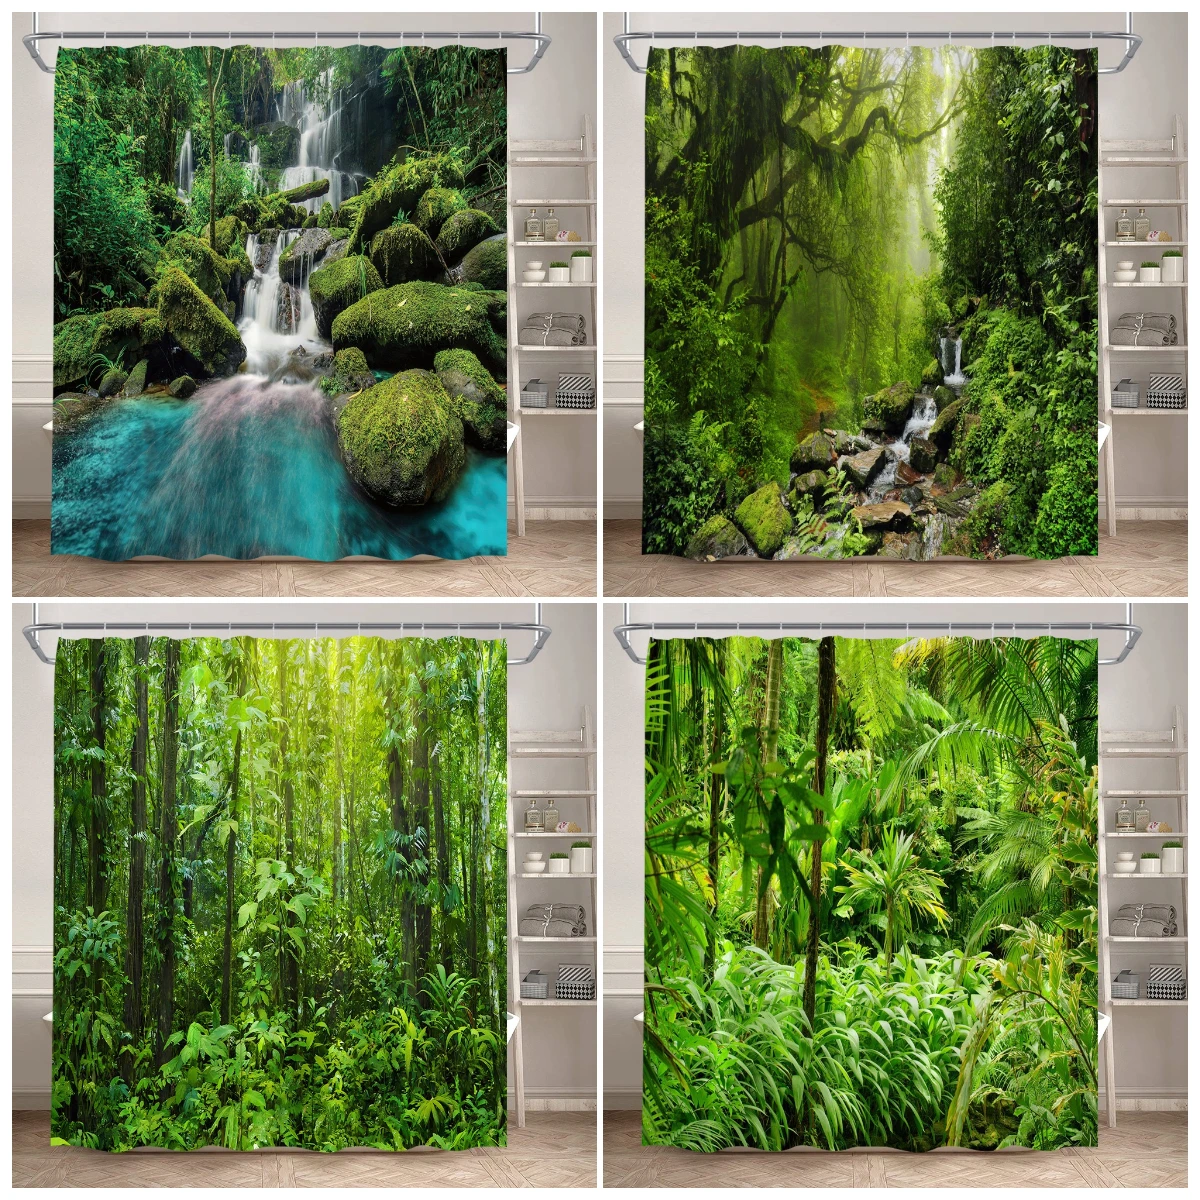 

Forest Landscape Shower Curtains Tropical Jungle Palm Plants Waterfall Nature Scenery Fabric Bathroom Curtain Decor With Hooks